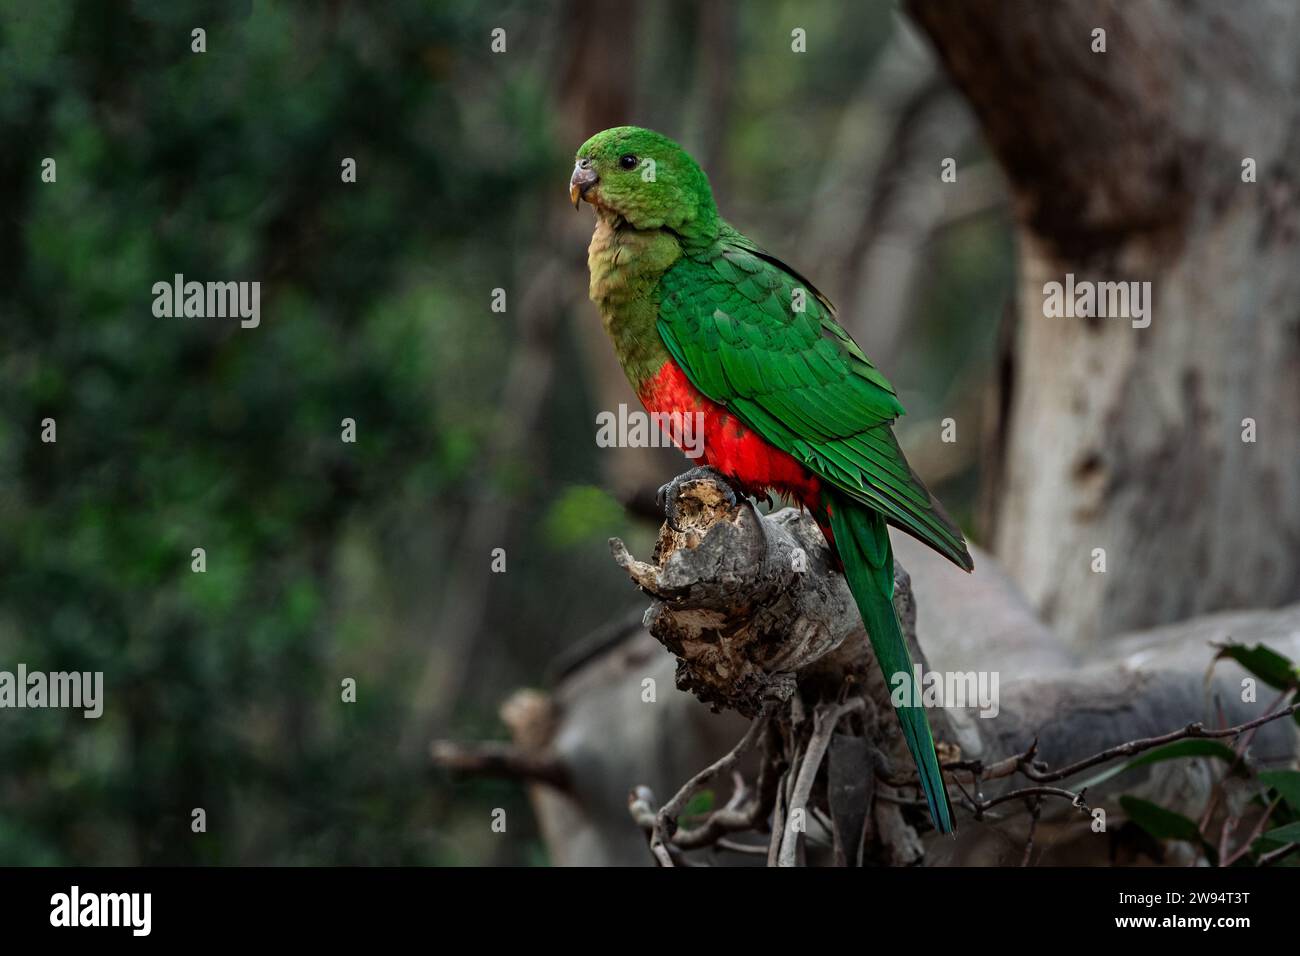 Colorful female Australian King Parrot sitting in tree. Stock Photo